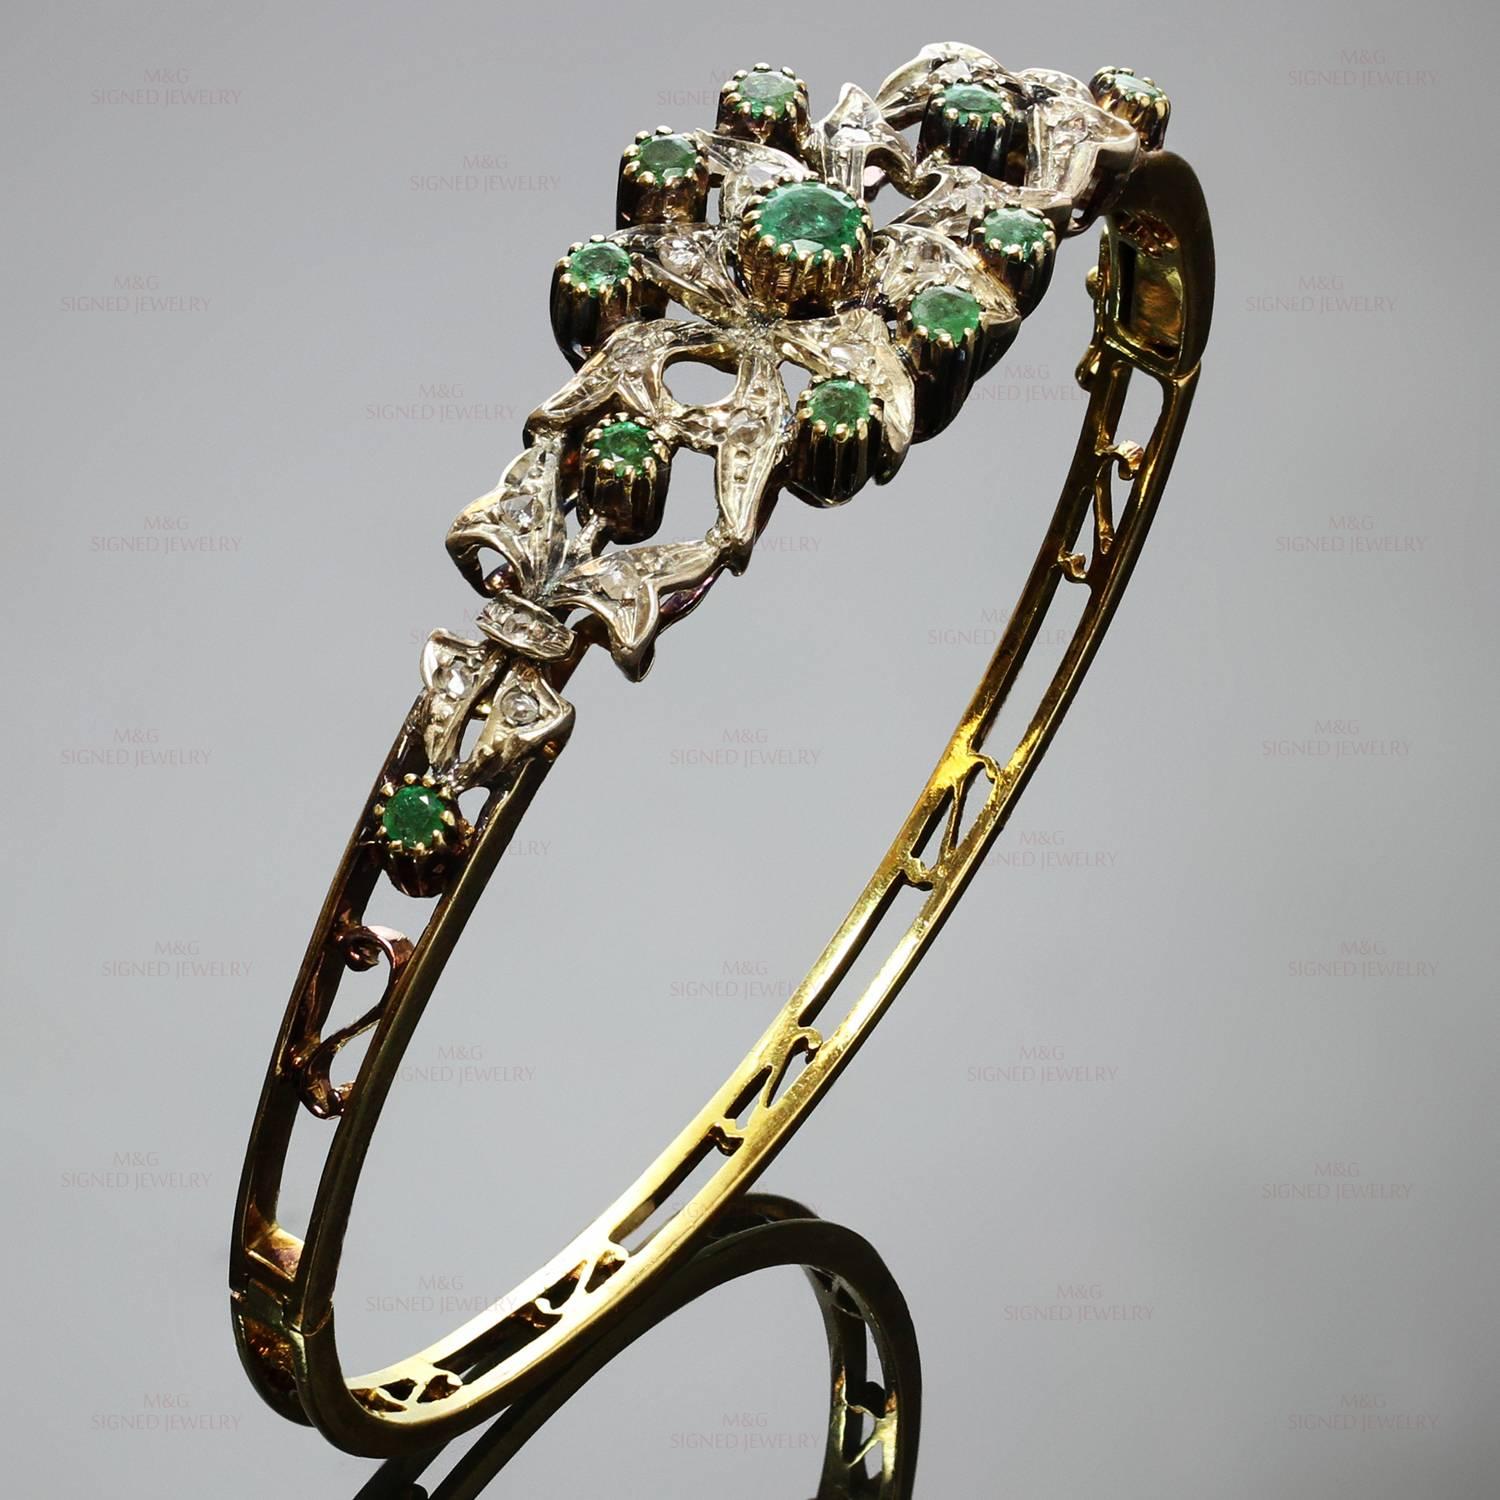 This stunning vintage bangle bracelet is crafted in 18k yellow gold and sterling silver and beautifully set with rose-cut diamonds and emeralds. Made in Italy circa 1950s. Measurements: 0.62